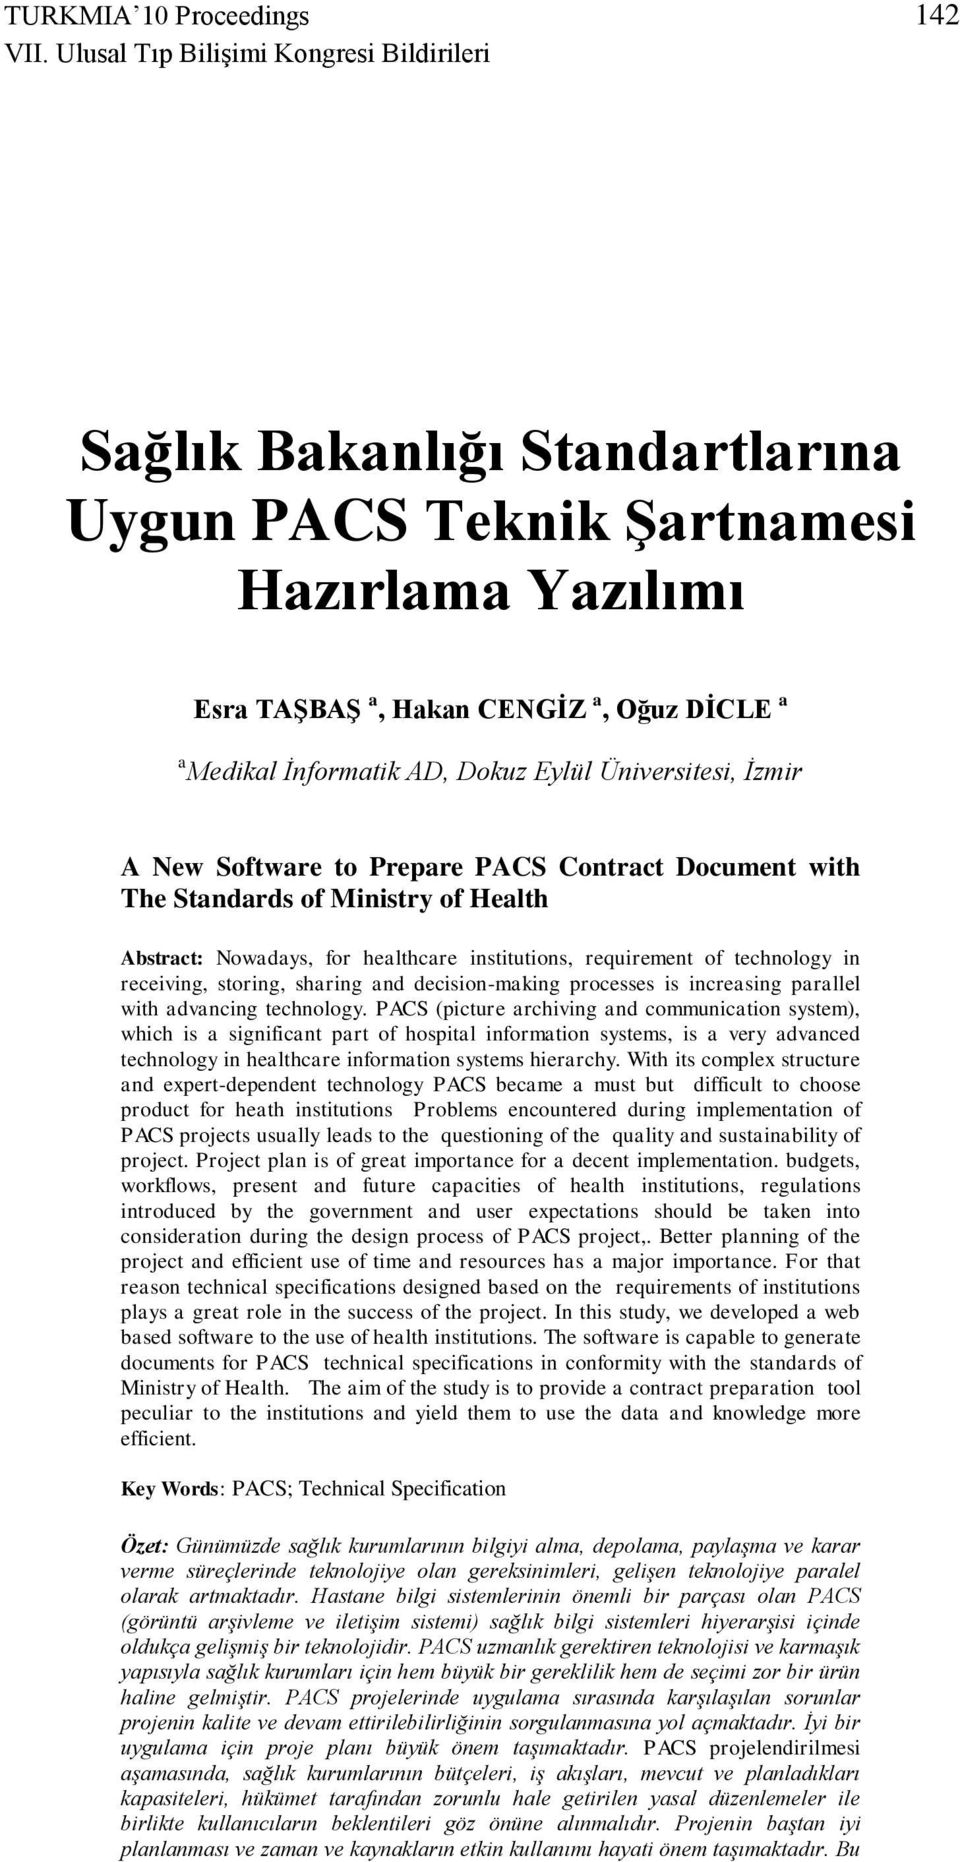 Eylül Üniversitesi, İzmir A New Software to Prepare PACS Contract Document with The Standards of Ministry of Health Abstract: Nowadays, for healthcare institutions, requirement of technology in